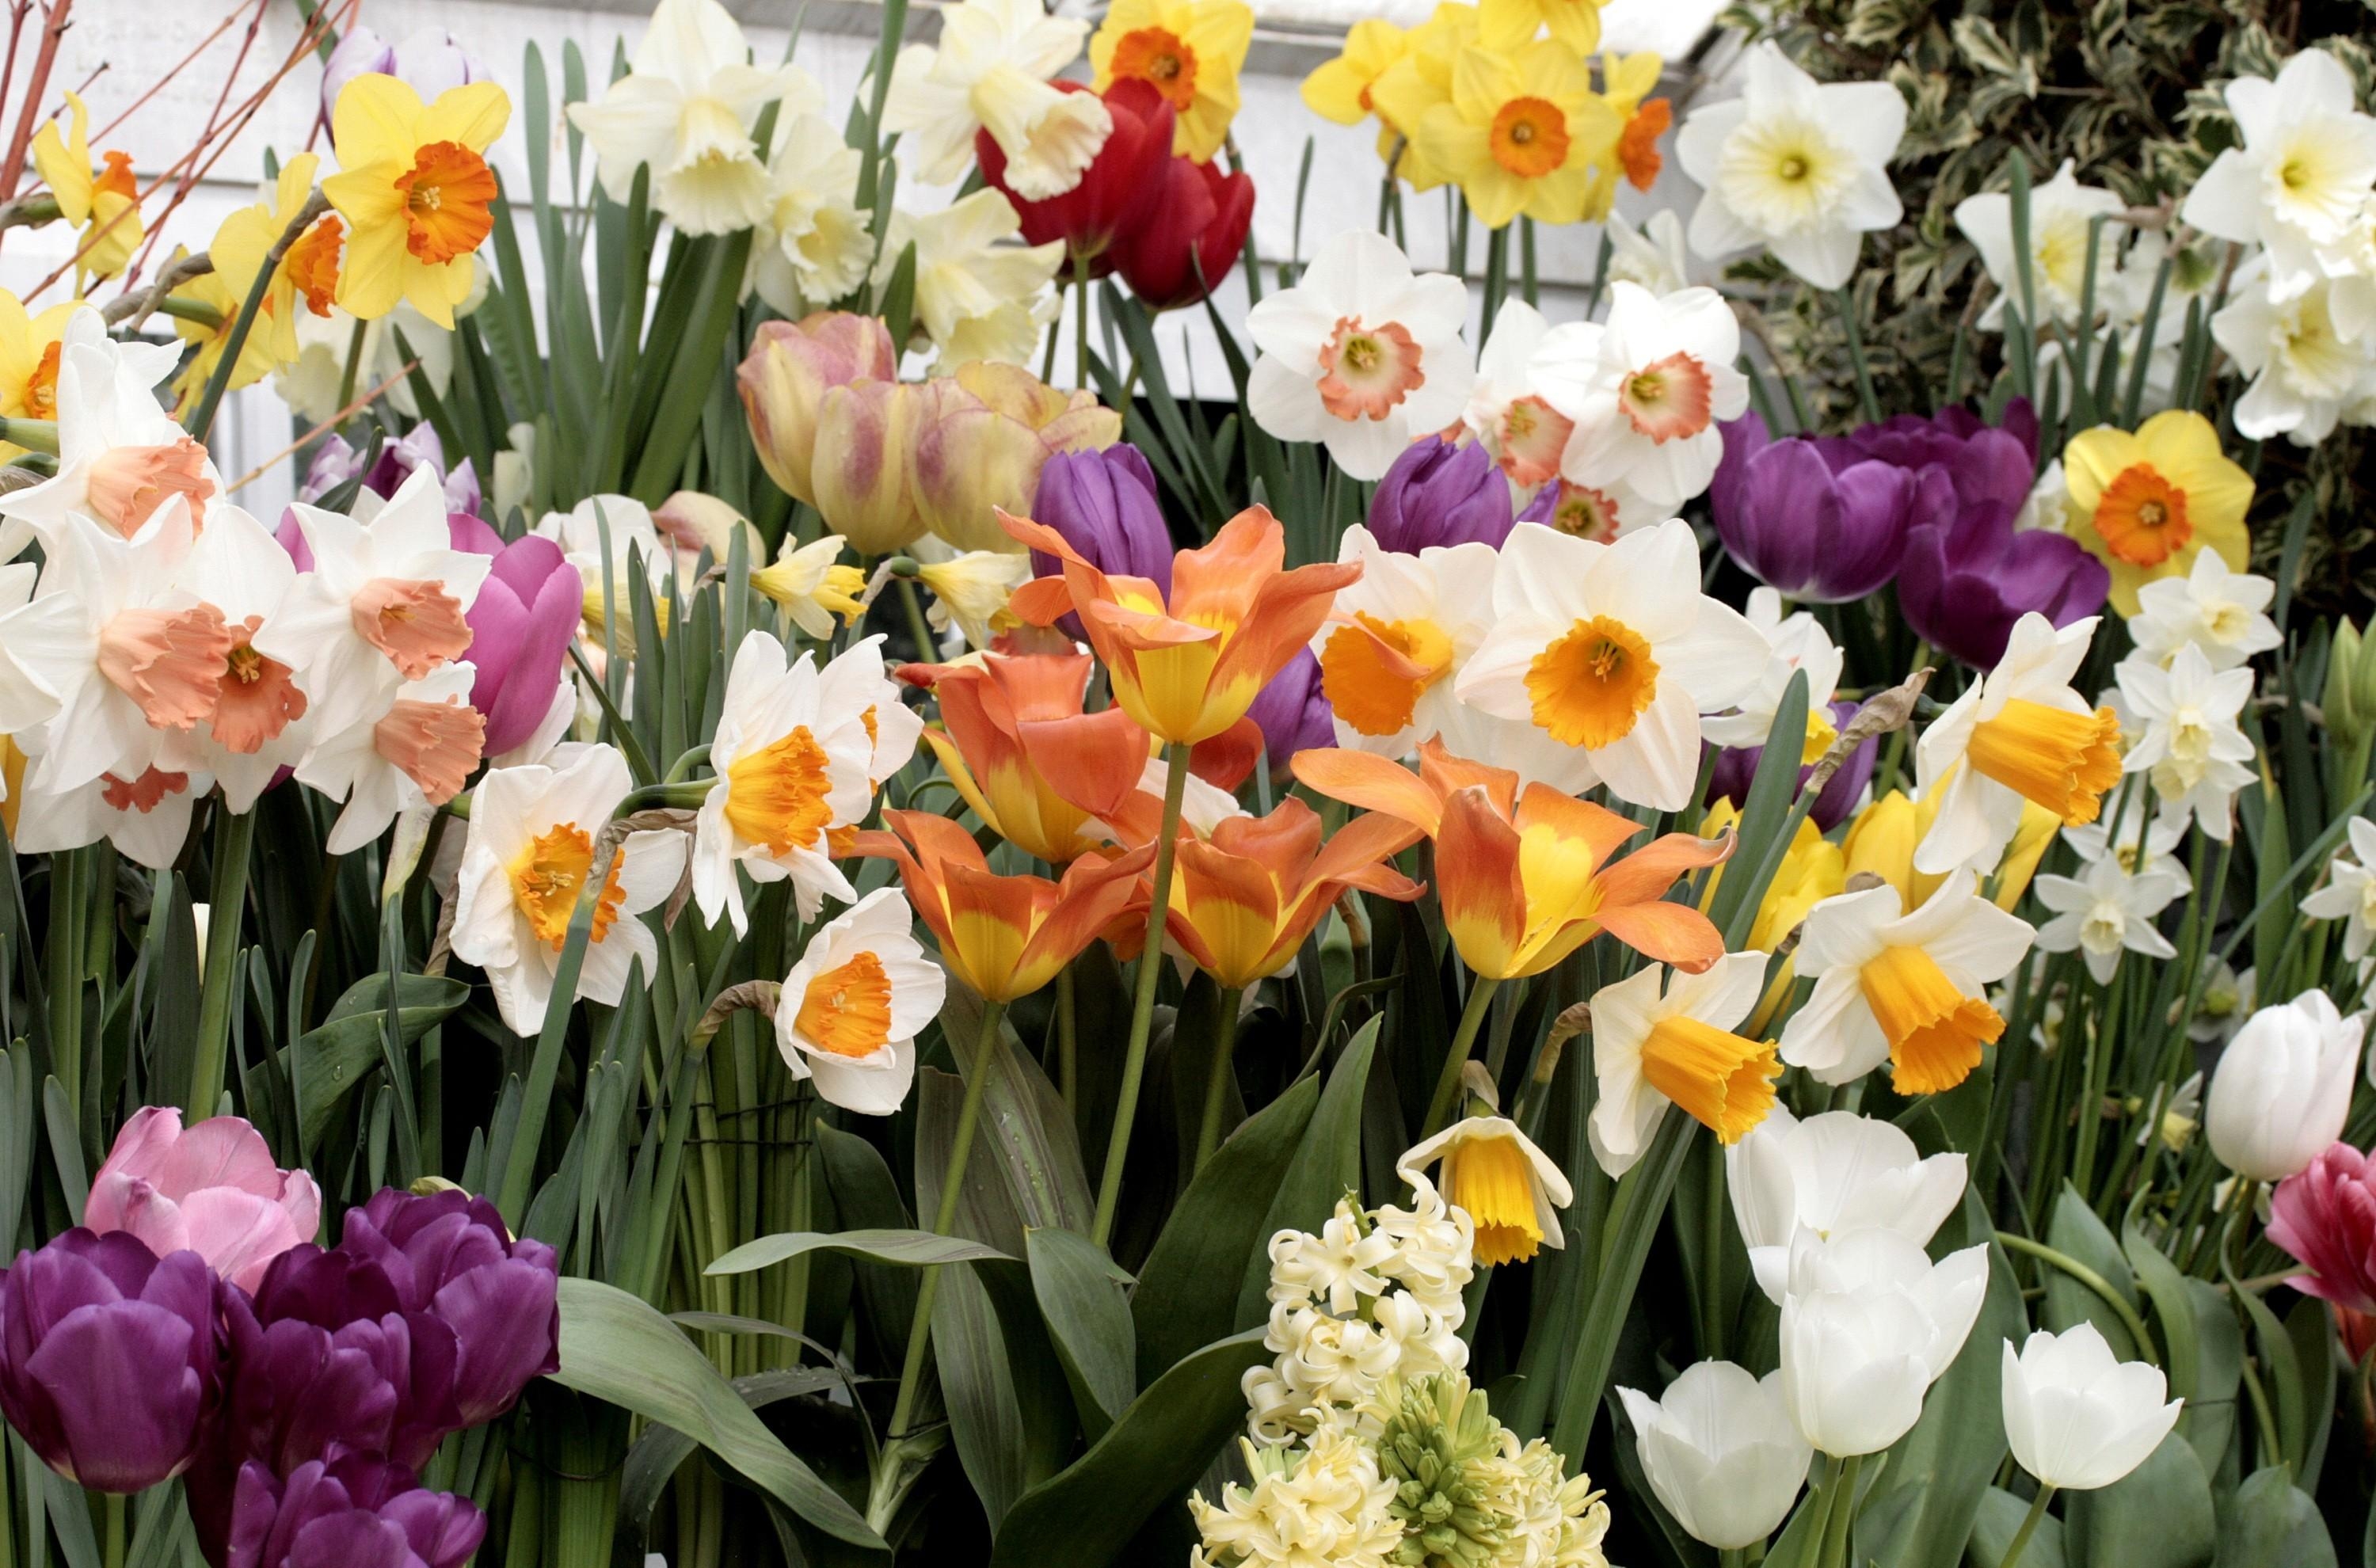 flowers, tulips, narcissussi, hyacinth, flower bed, flowerbed, lots of, multitude Full HD